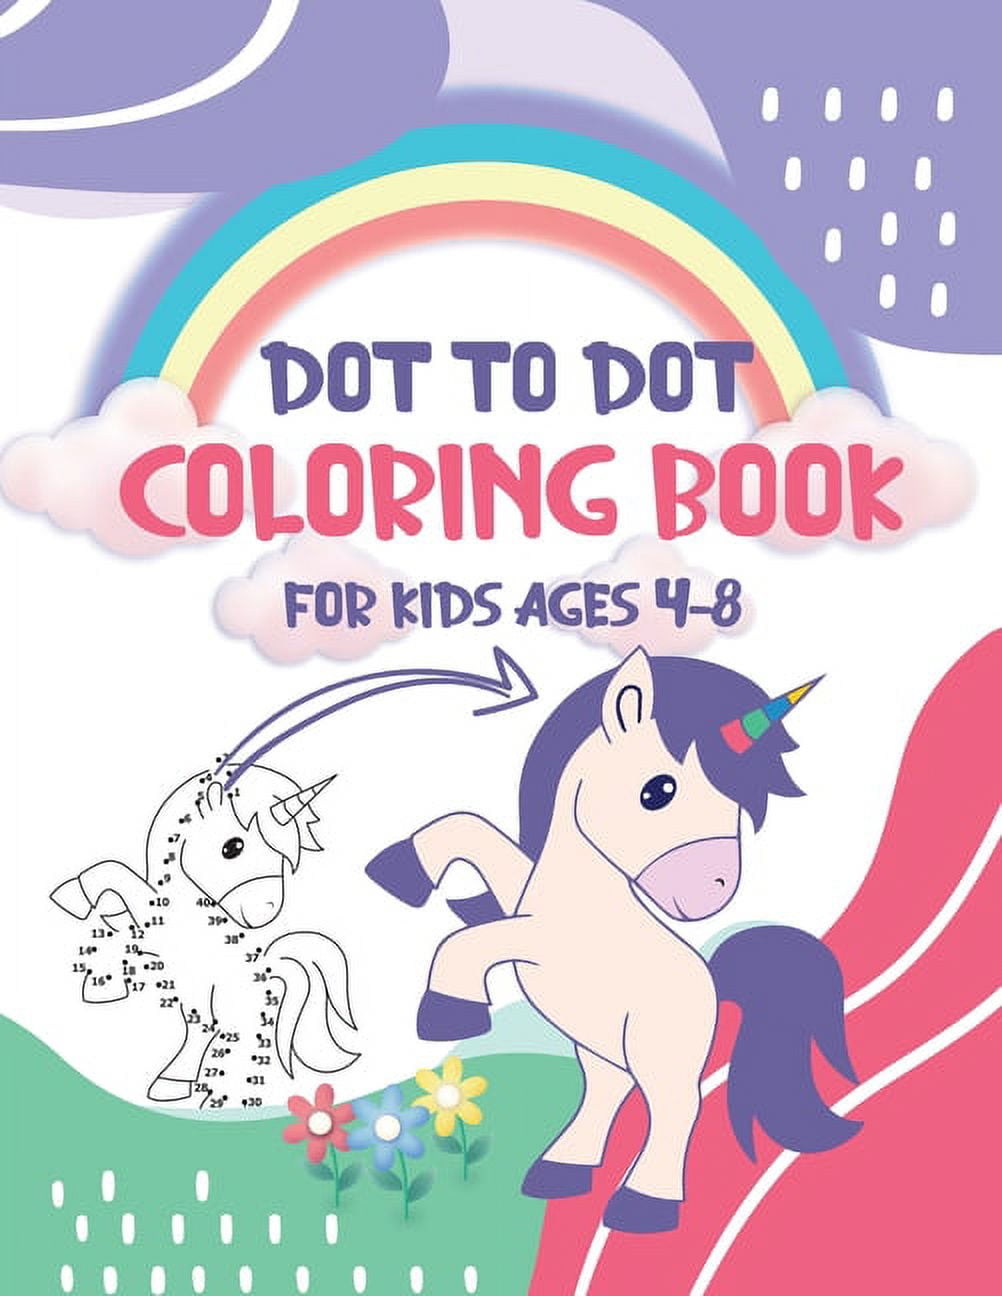 Dot to Dot Coloring Book for Kids Ages 4-8: 8x11 inch coloring